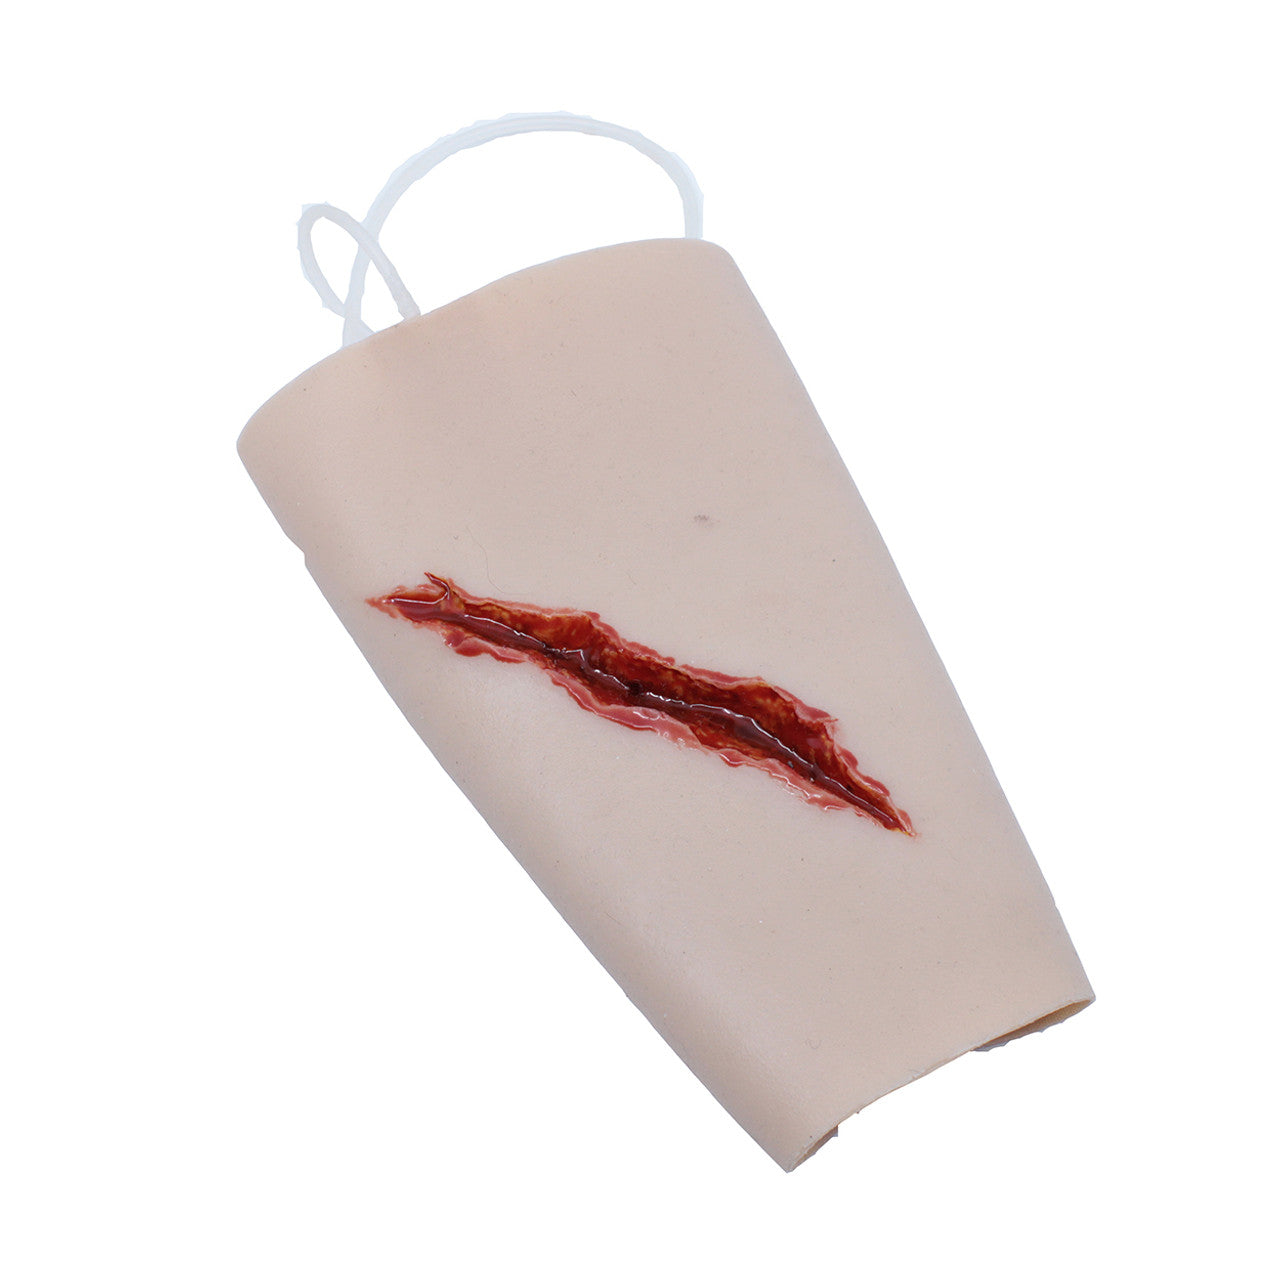 TRAUMASIM Wearable Jagged Laceration – Forearm – With Bleeding Capacity